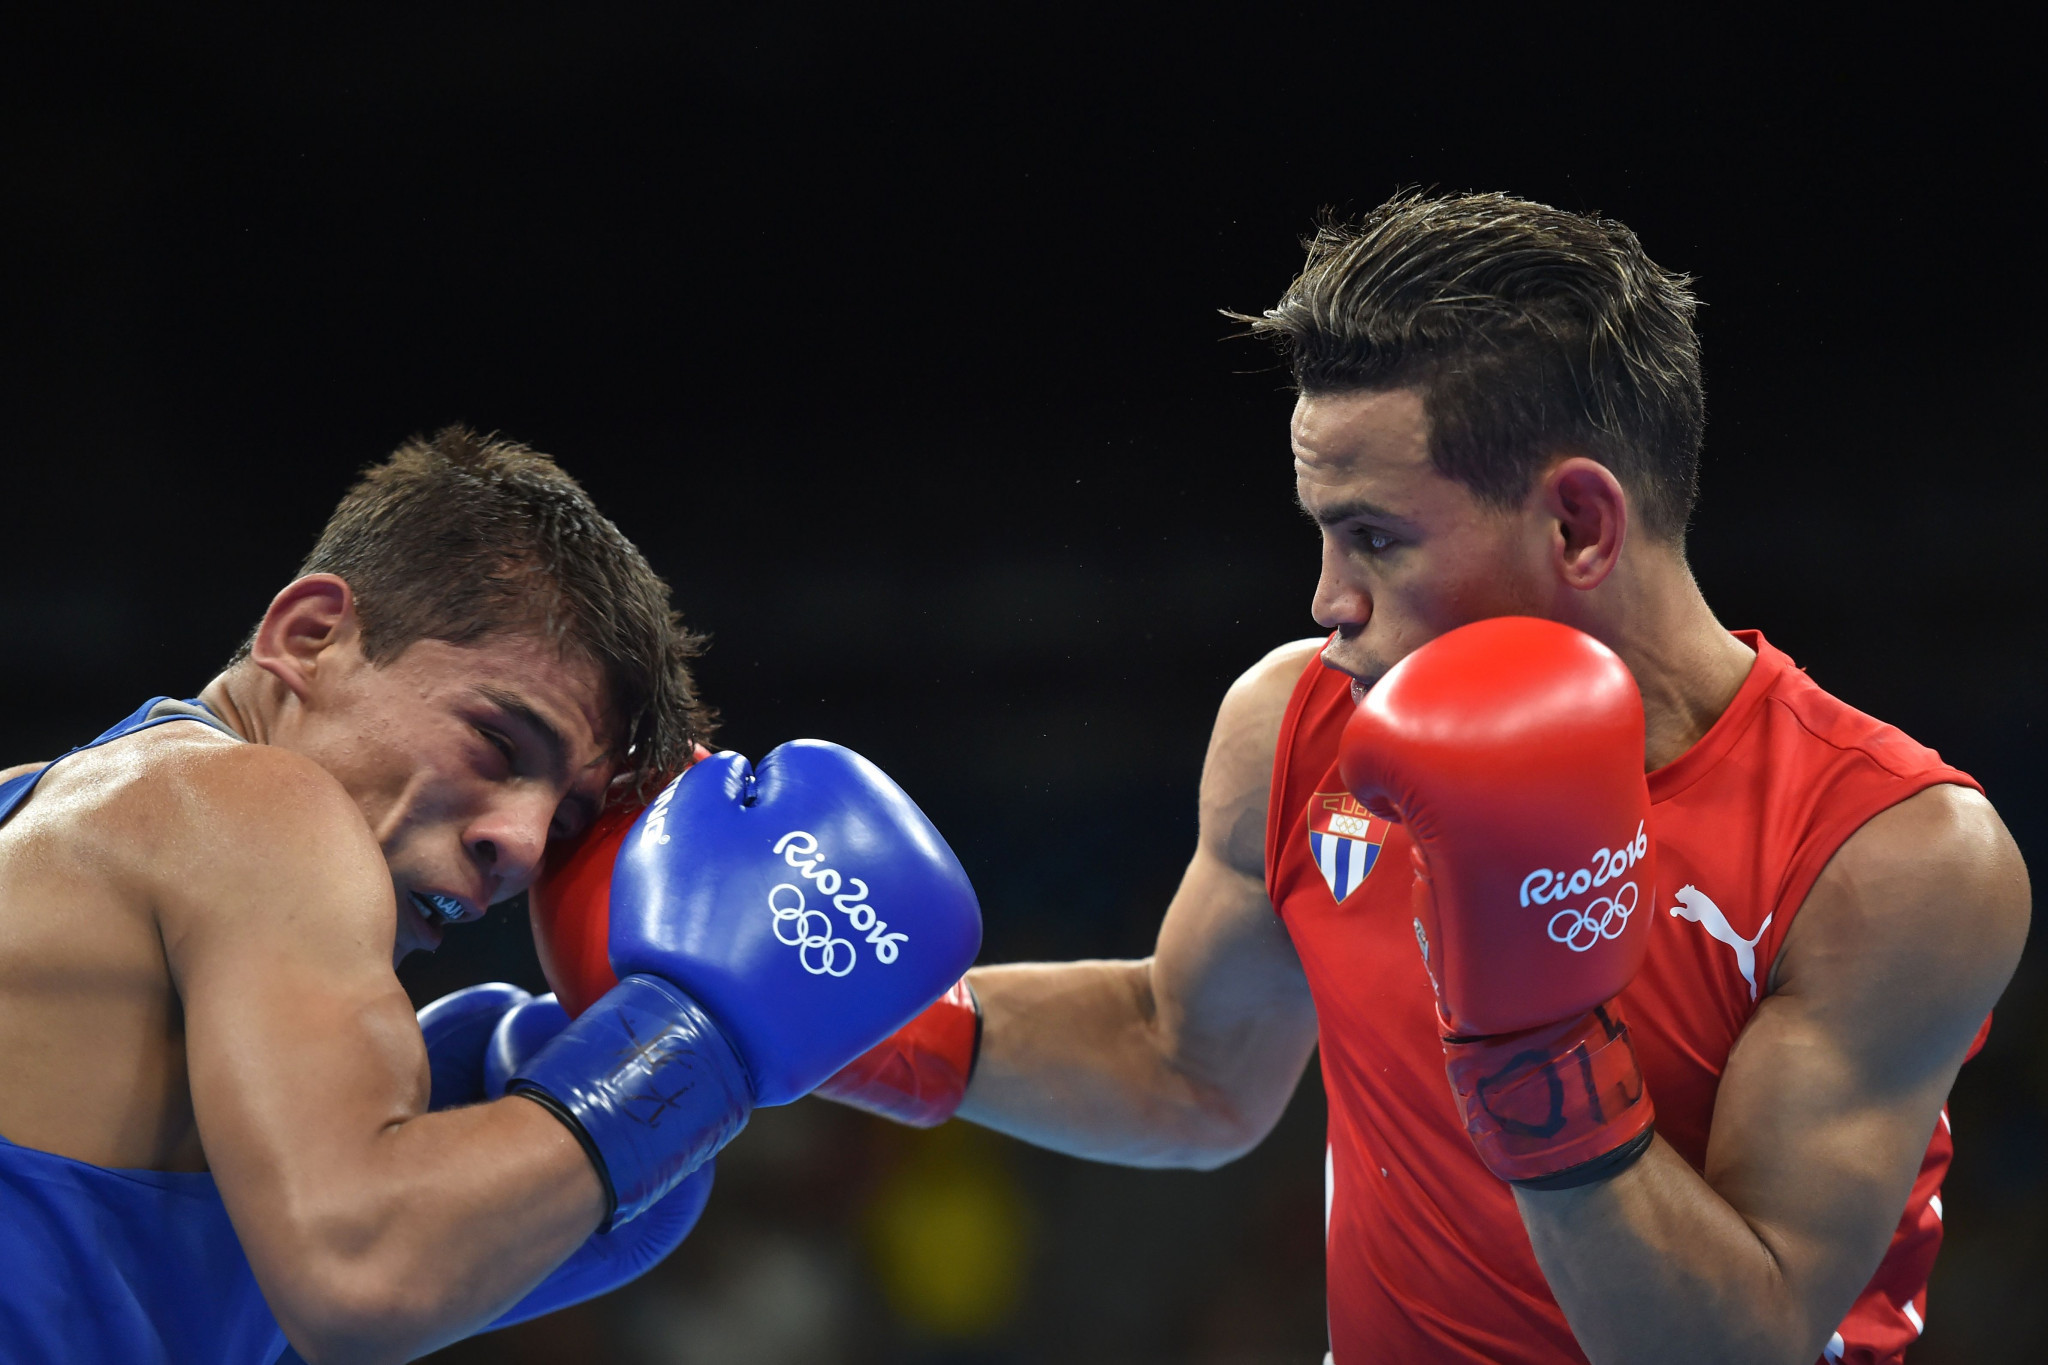 AIBA reject plan to exclude two men's categories at Tokyo 2020 to accommodate two more women's divisions